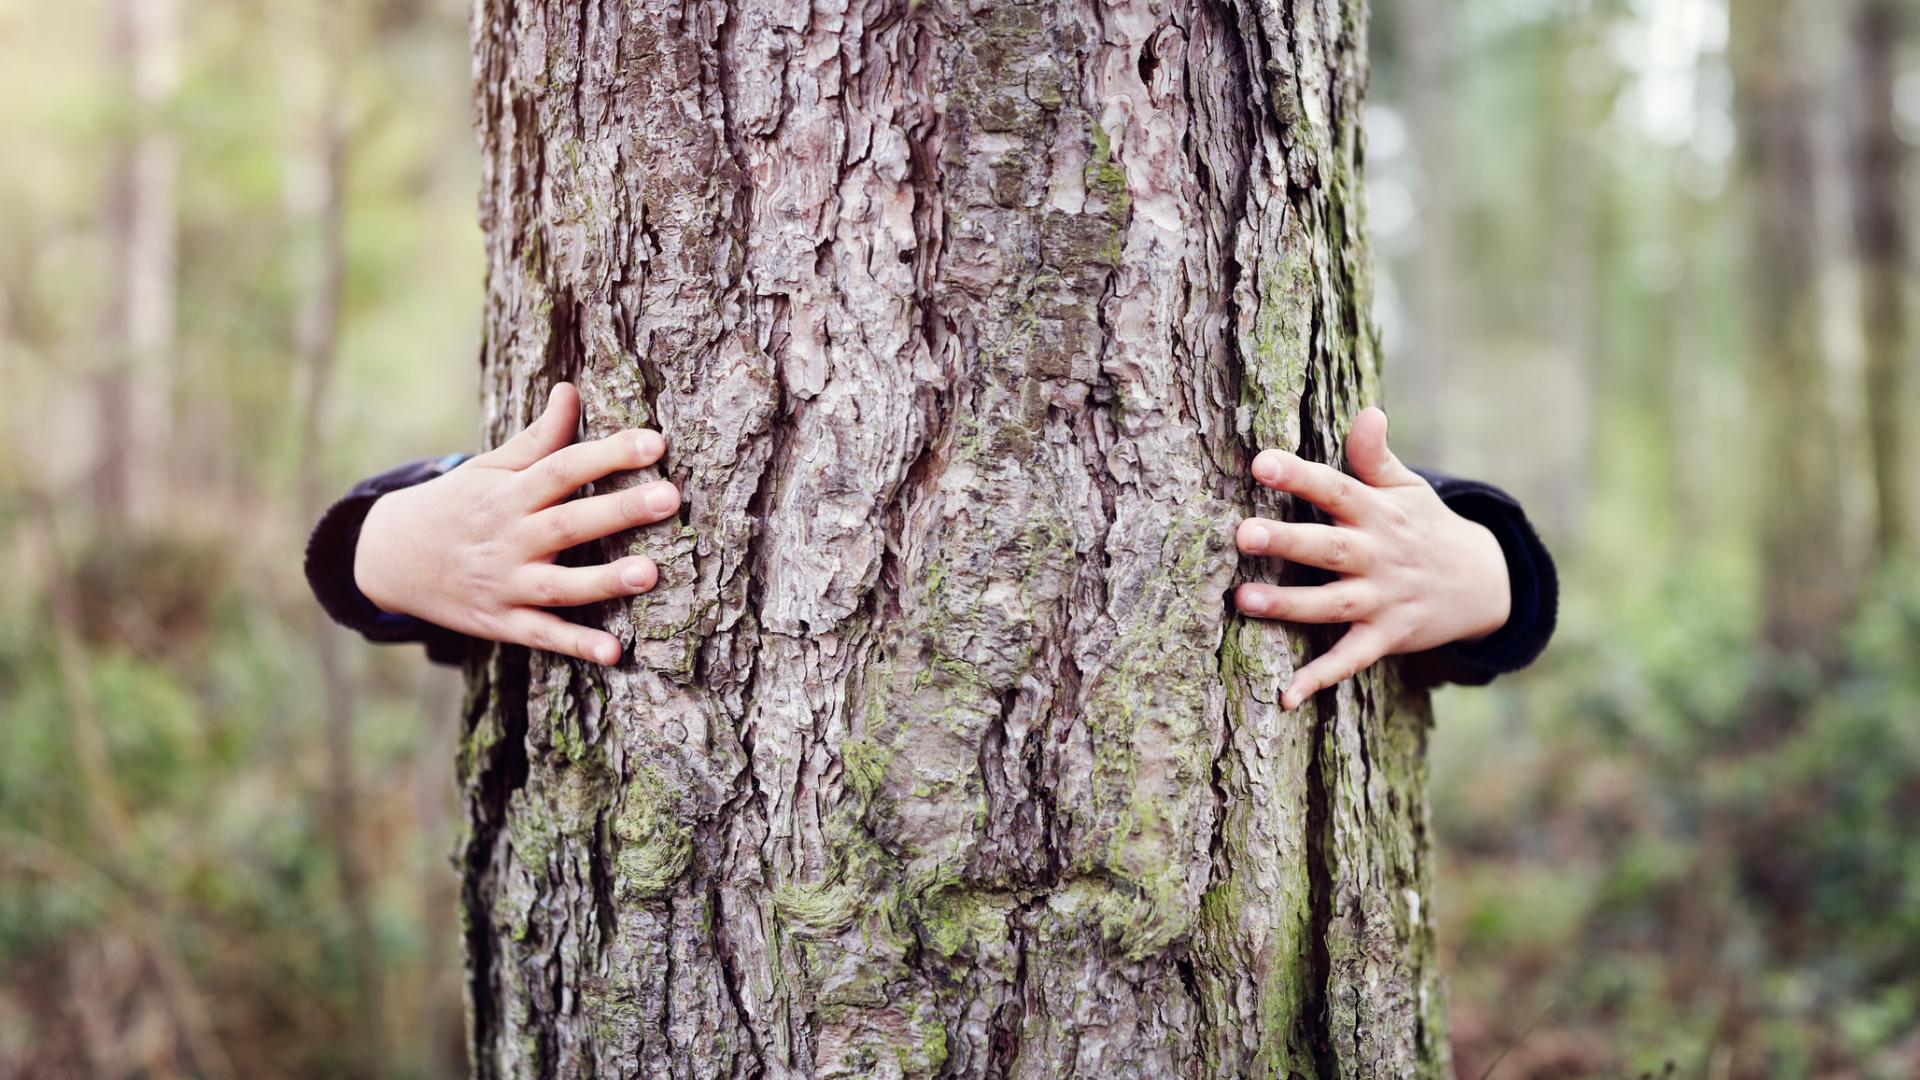 child's hands embracing trunk of pine tree